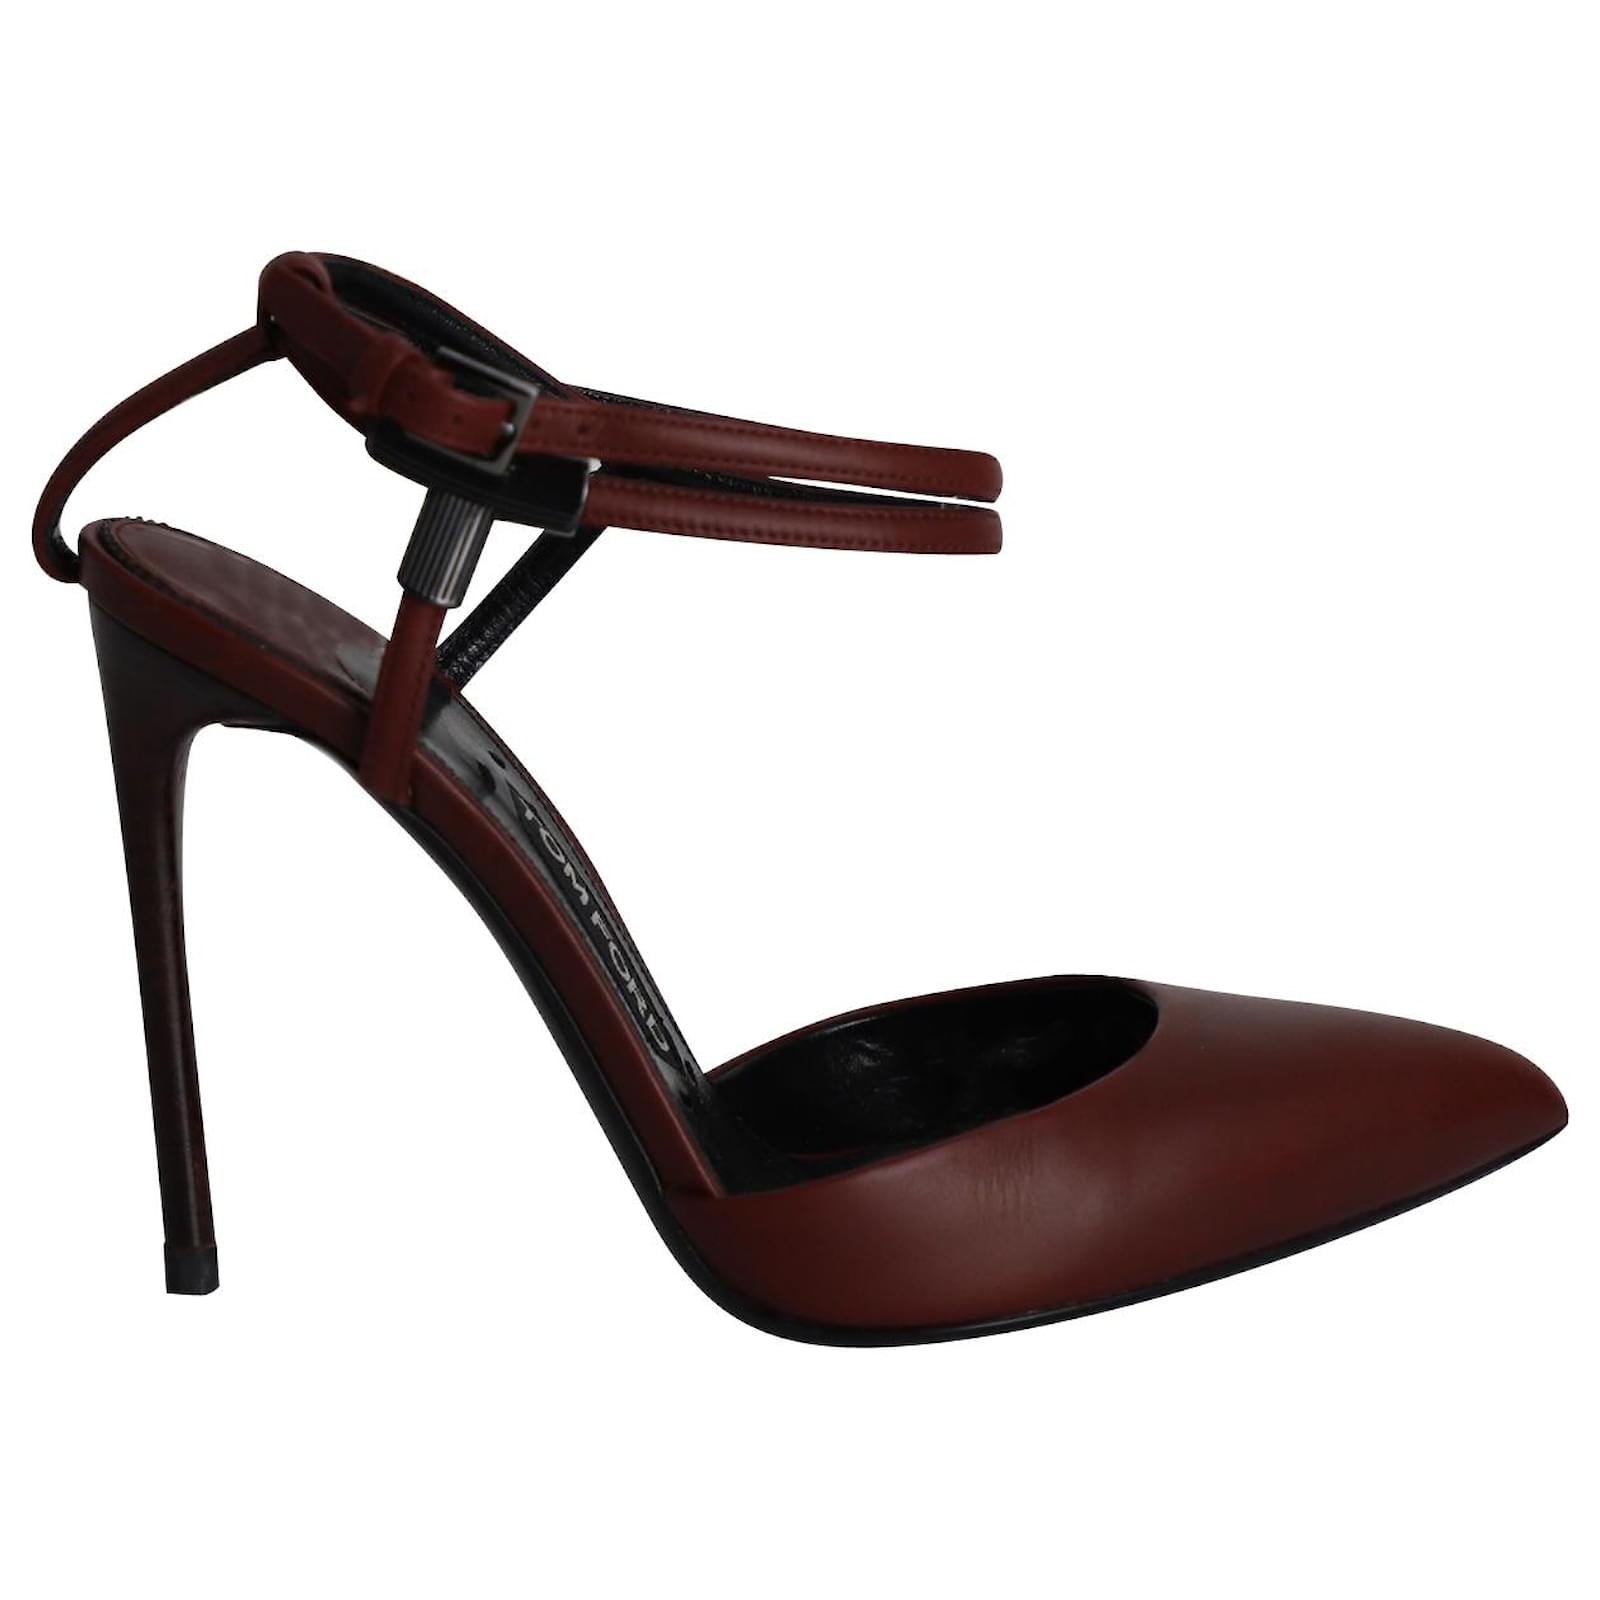 Burgundy Patent Leather Peep Toe T Strap Sexy High Heels Shoes | FSJshoes